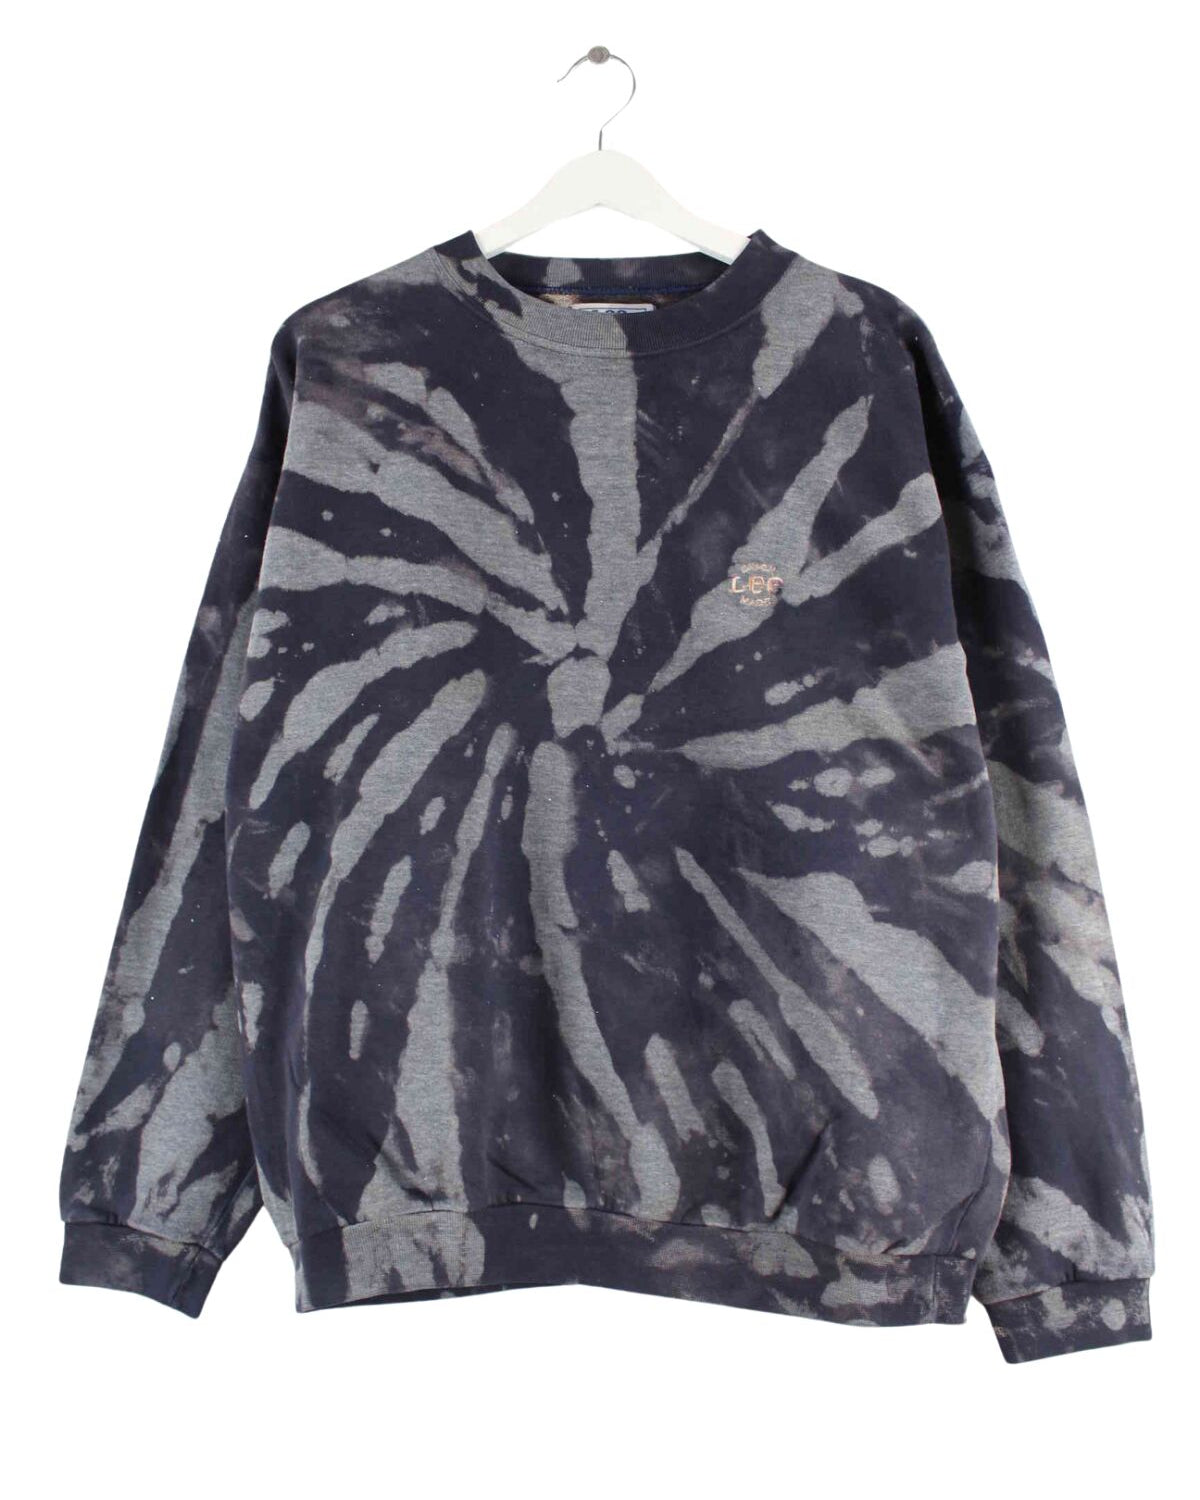 Lee 90s Vintage Embroidered Tie Dye Sweater Grau M (front image)